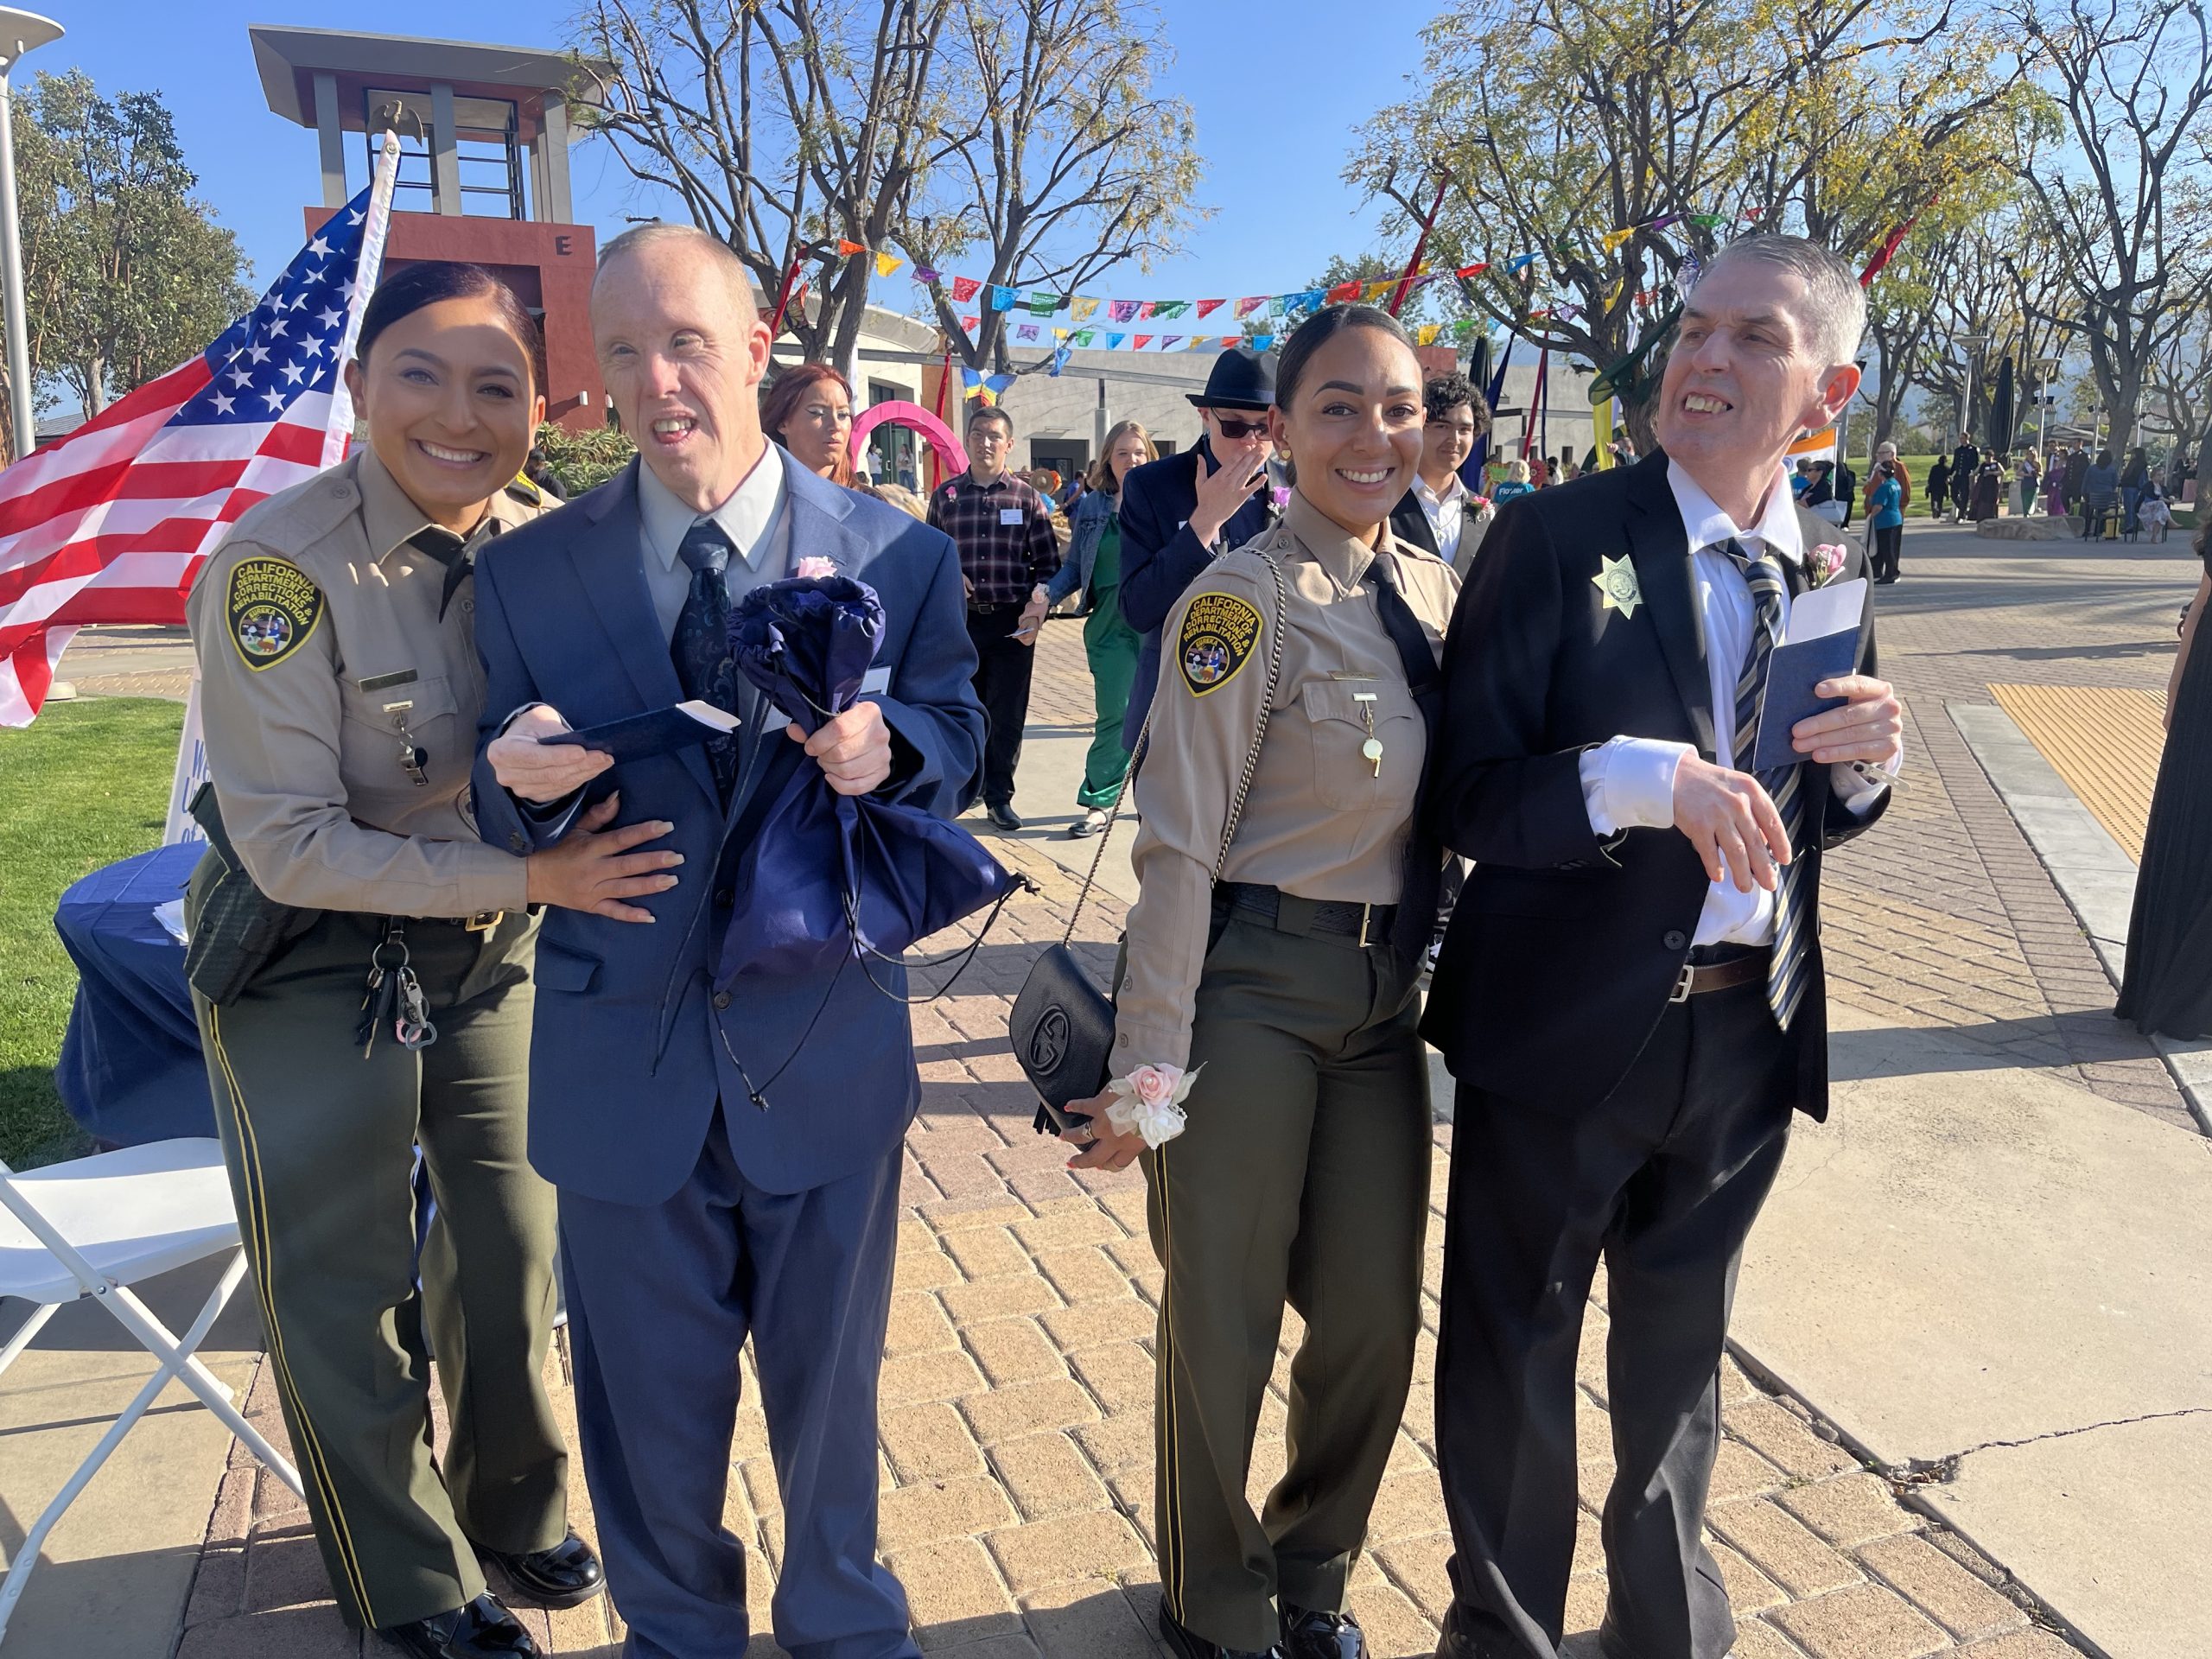 Two correctional officers with two special needs guests at a prom.